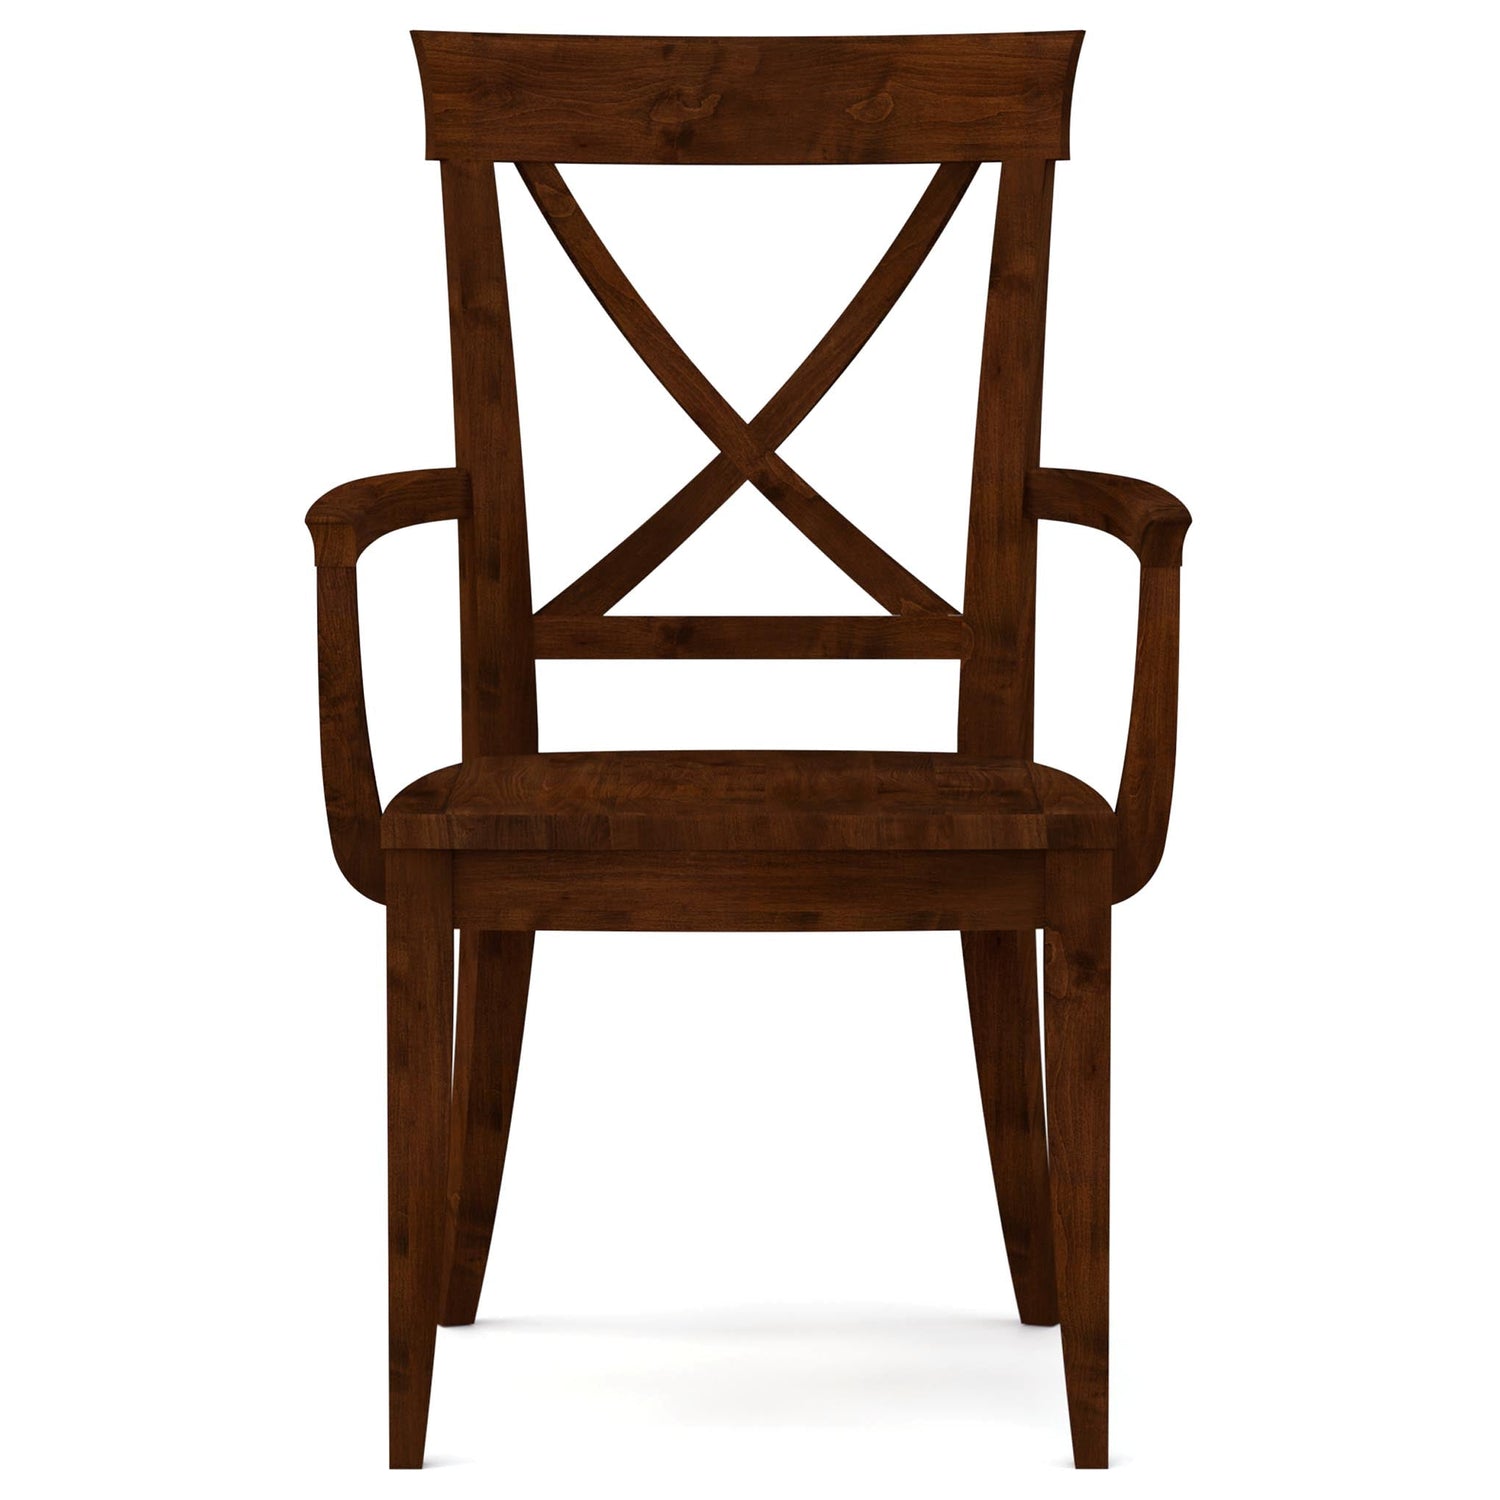 Revere Wooden Arm Chair